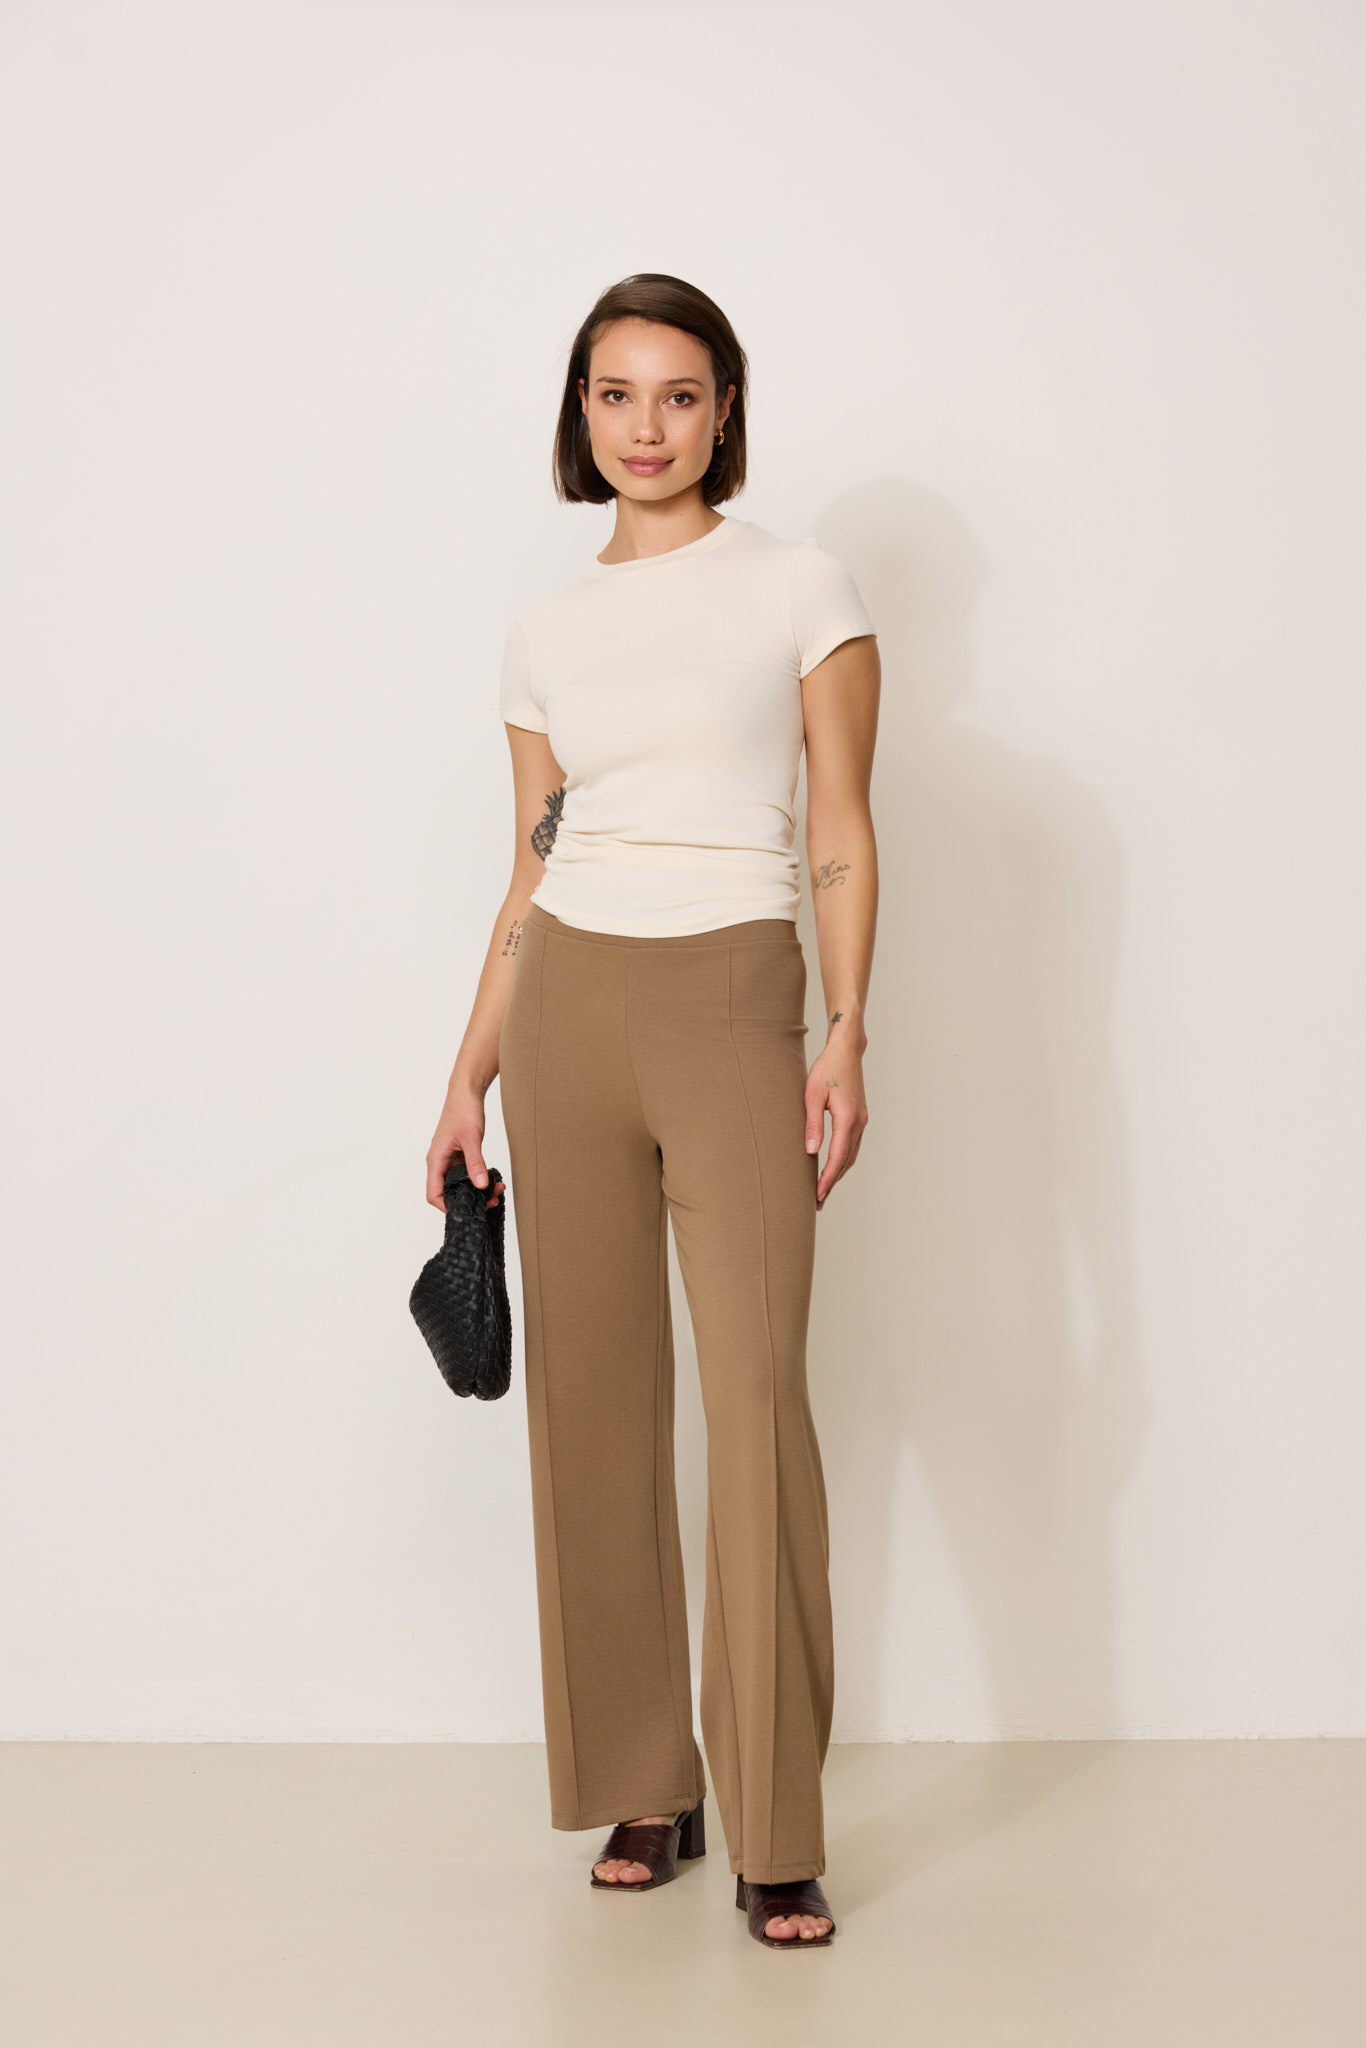 The Full Moon Skinny Leather Pants – IZEL BOUTIQUE